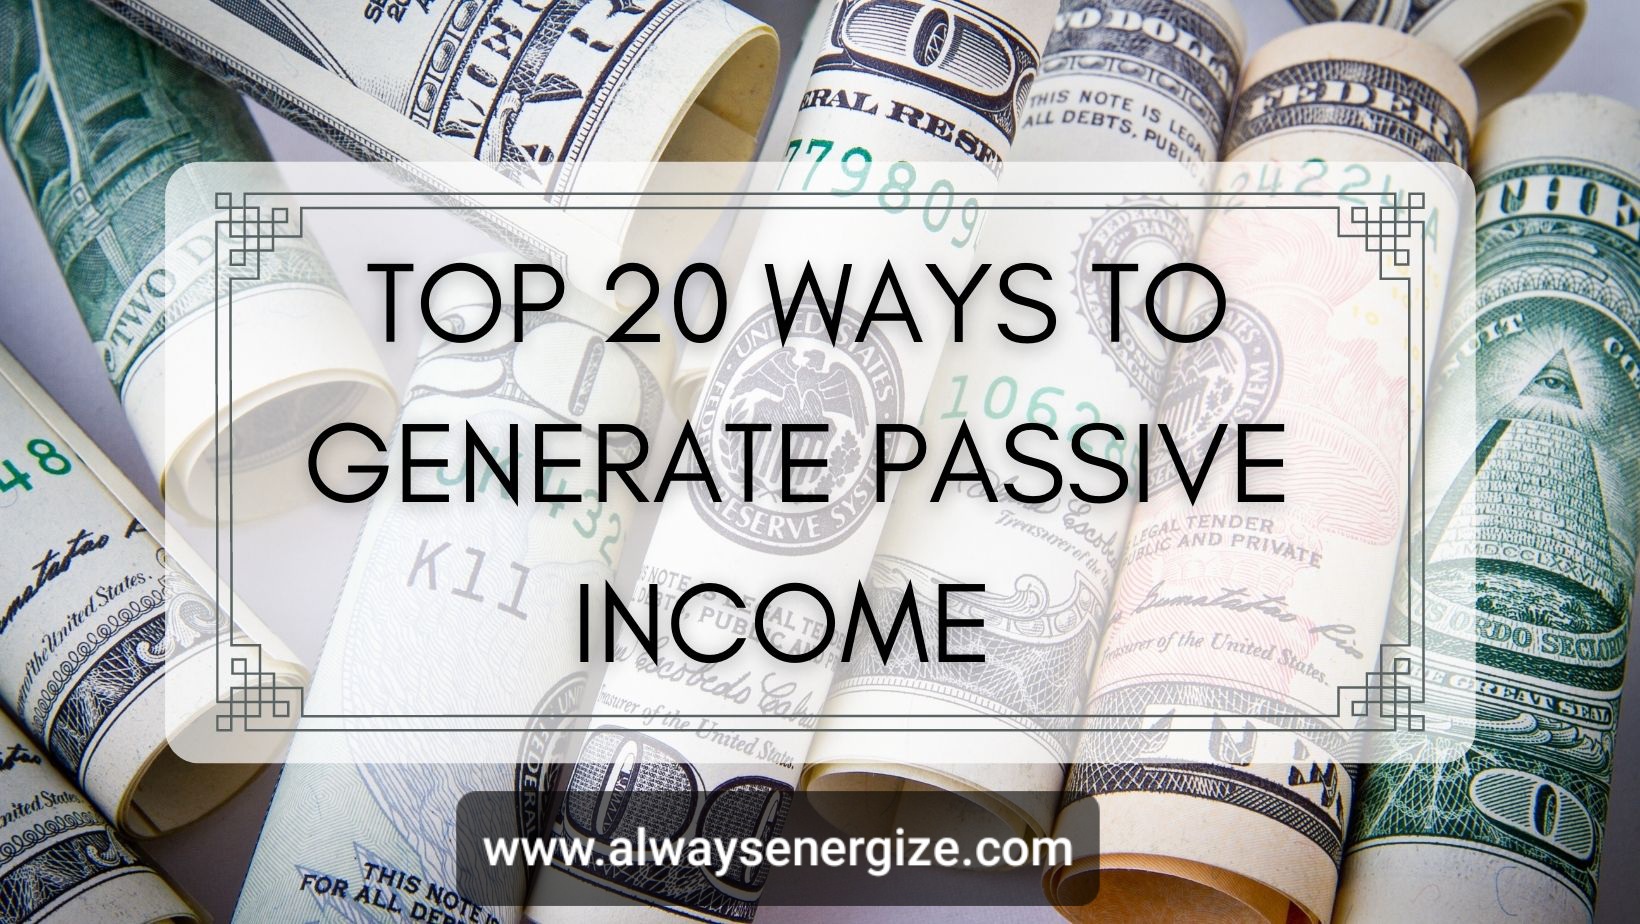 Top 20 Ways To Generate Passive Income